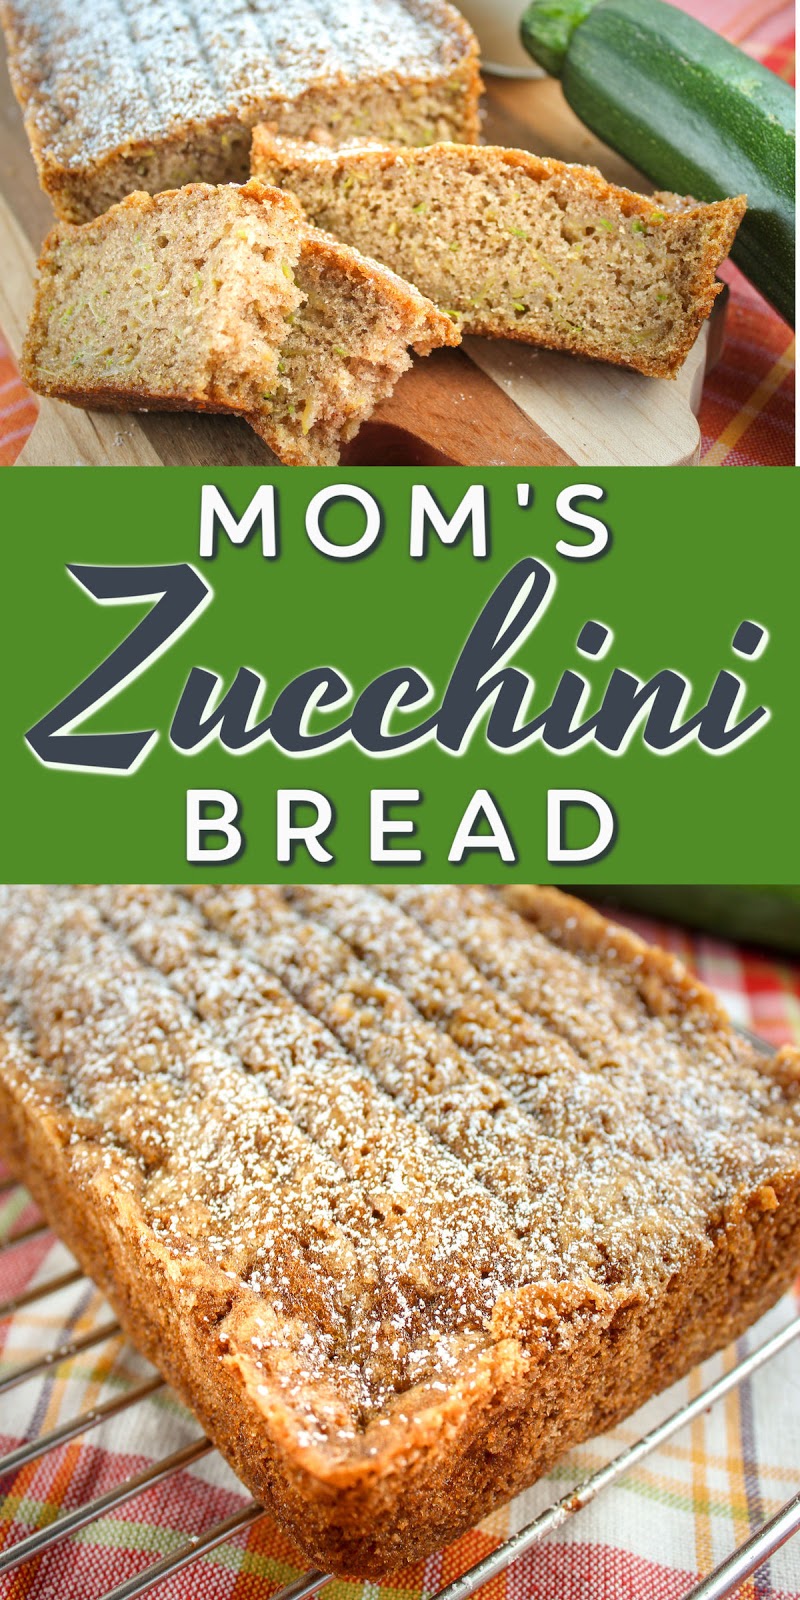 Zucchini Bread is this magical mix of a bread and cake – sweet and savory – it’s just delicious. The best part is – Mom’s Zucchini Bread recipe is SUPER EASY to make!
 via @foodhussy